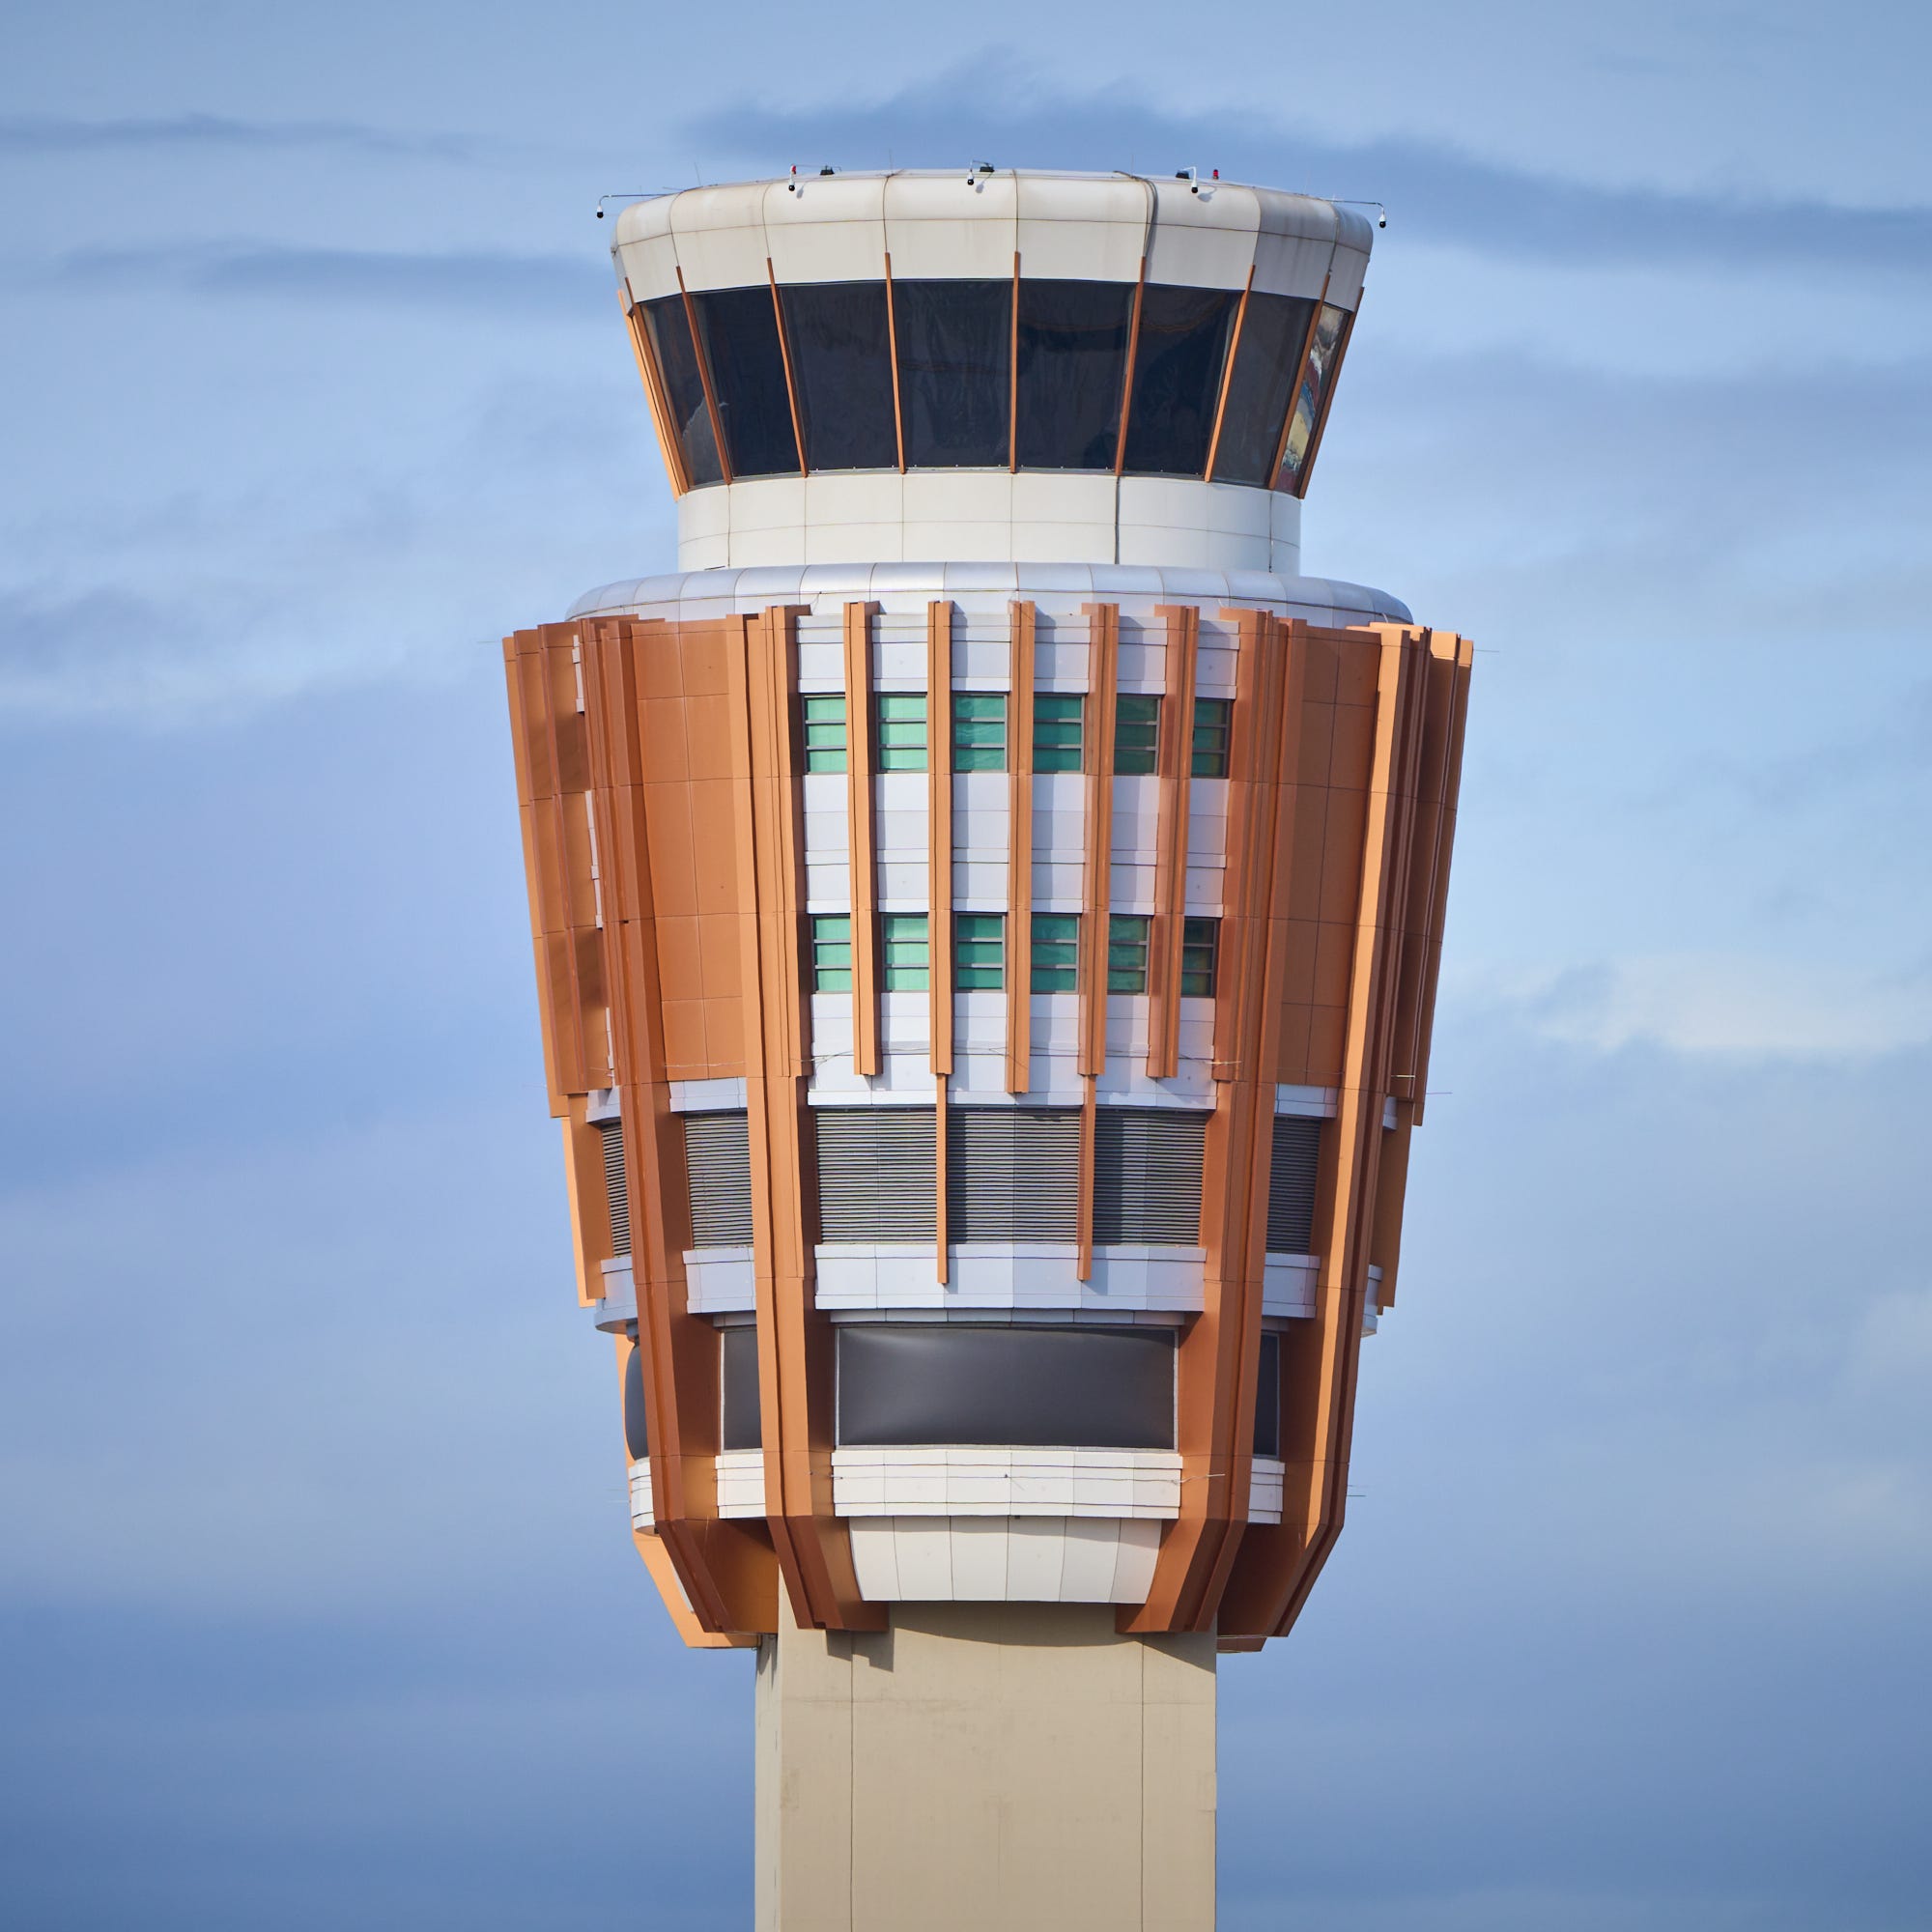 The air traffic control tower at Phoenix Sky Harbor International Airport is shown on Feb. 13, 2023.